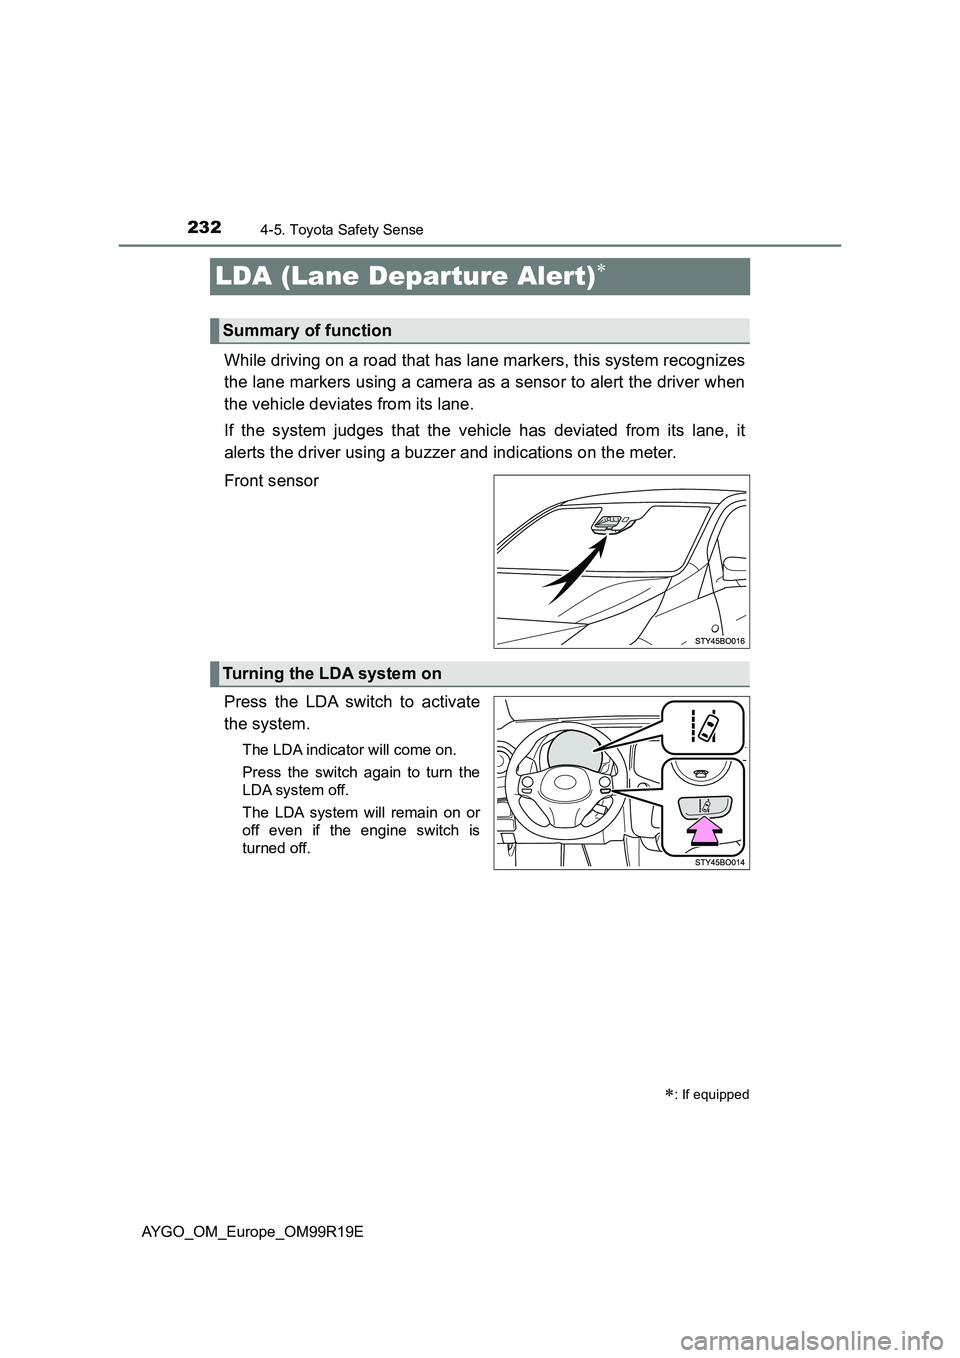 TOYOTA AYGO 2019  Owners Manual (in English) 2324-5. Toyota Safety Sense
AYGO_OM_Europe_OM99R19E
LDA (Lane Departure Alert)
While driving on a road that has lane markers, this system recognizes 
the lane markers using a camera as a sensor to 